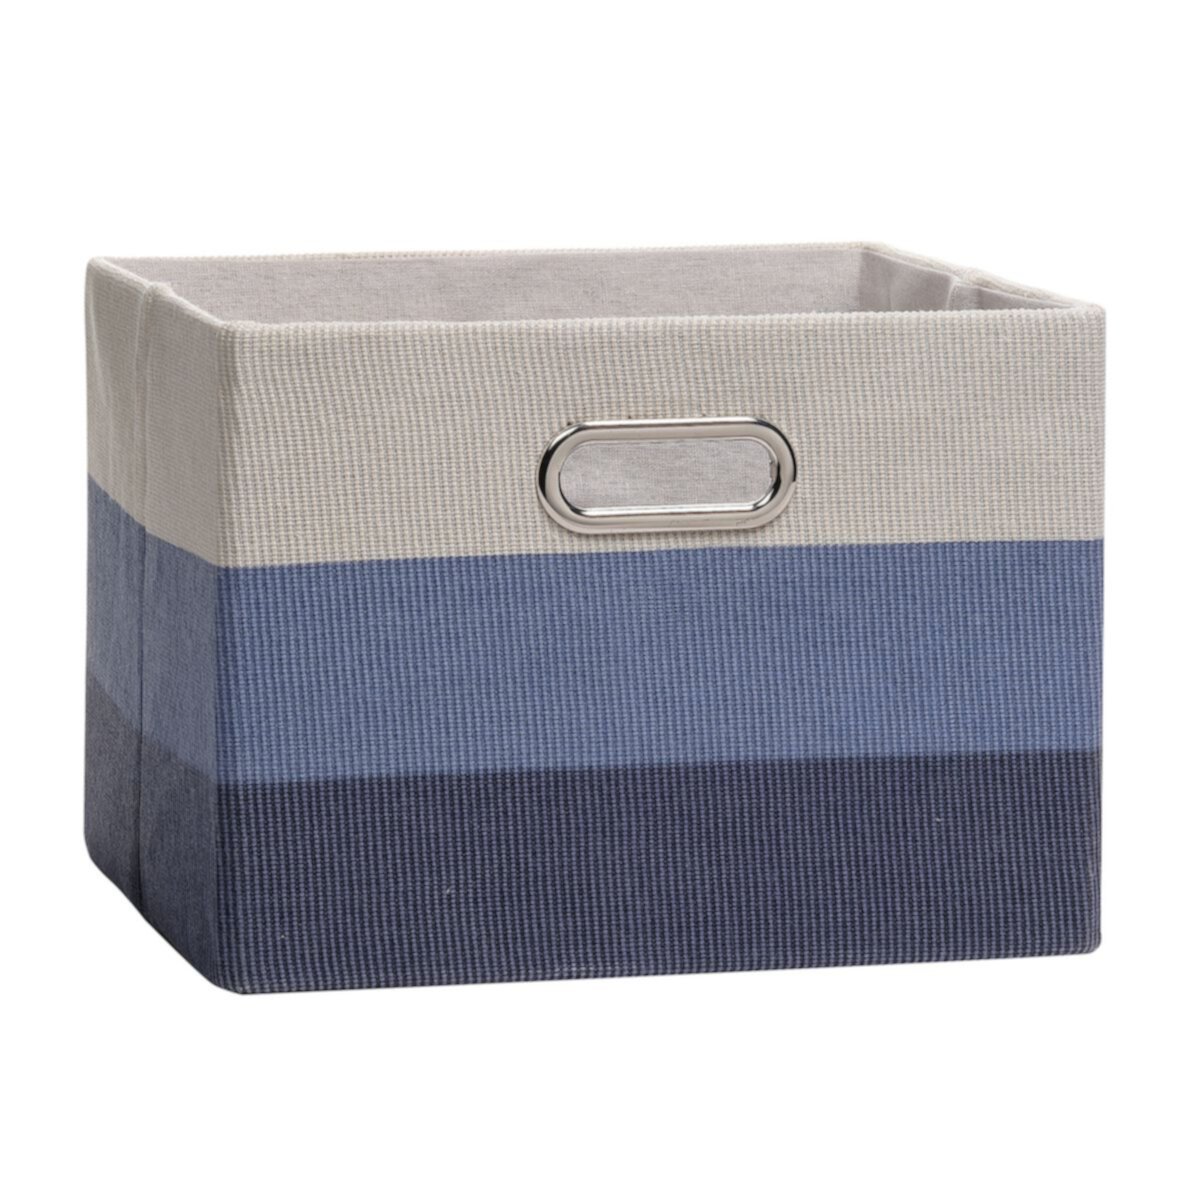 Lambs & Ivy Blue Ombre Foldable/collapsible Storage Bin/basket Lambs & Ivy